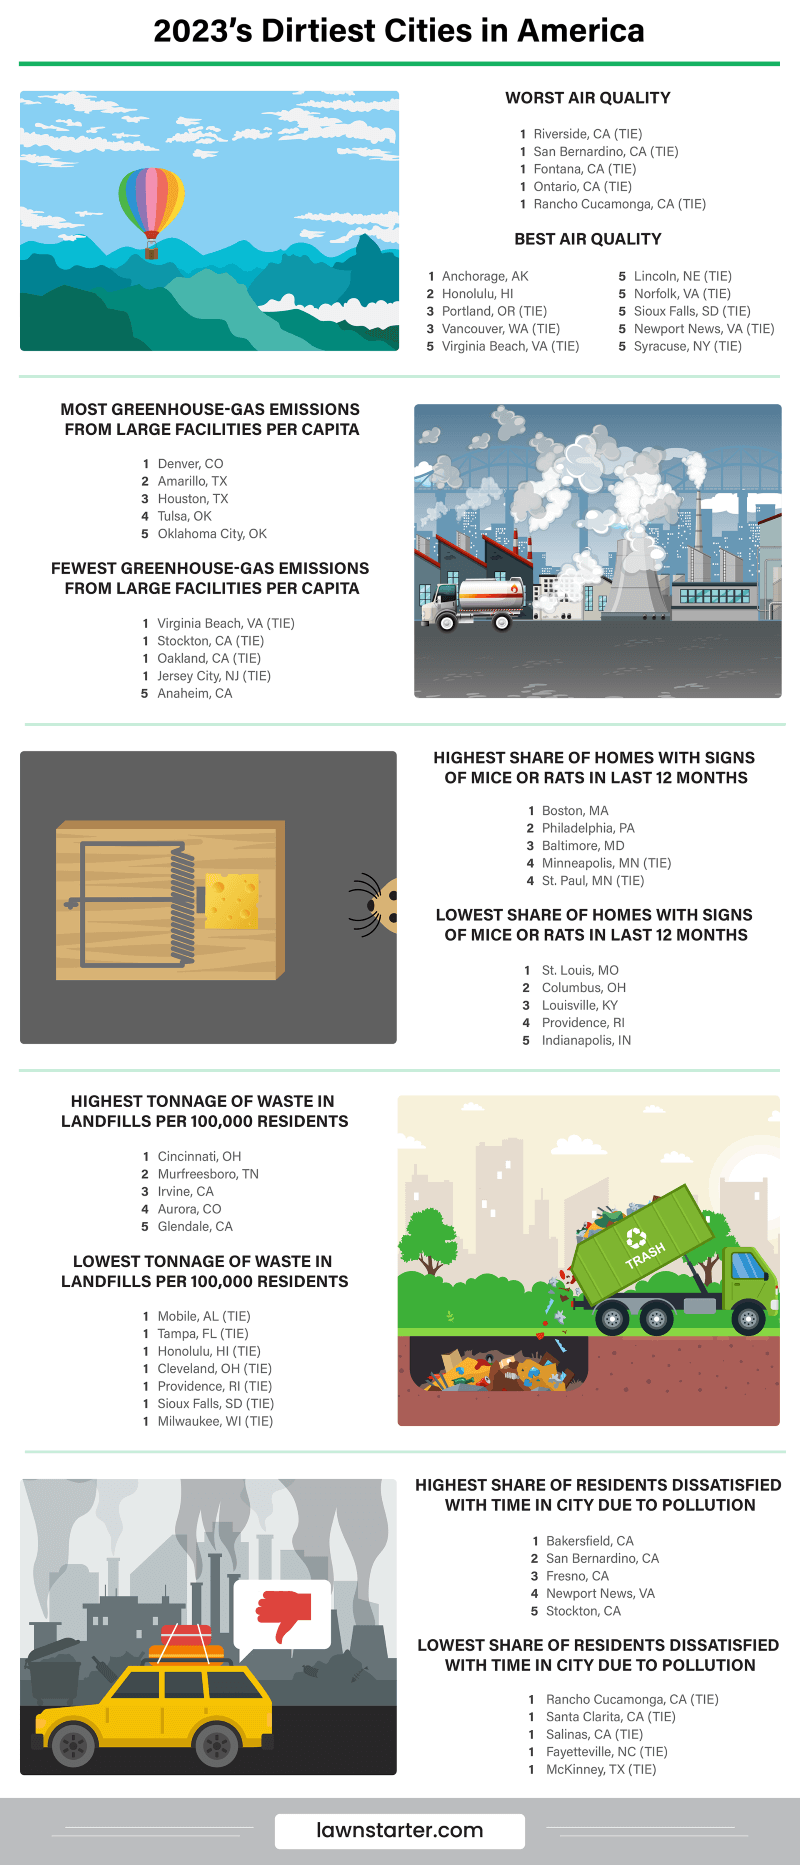 Infographic showing the Dirtiest Cities in America, a ranking based on pollution levels, infrastructure, consumer satisfaction, and more